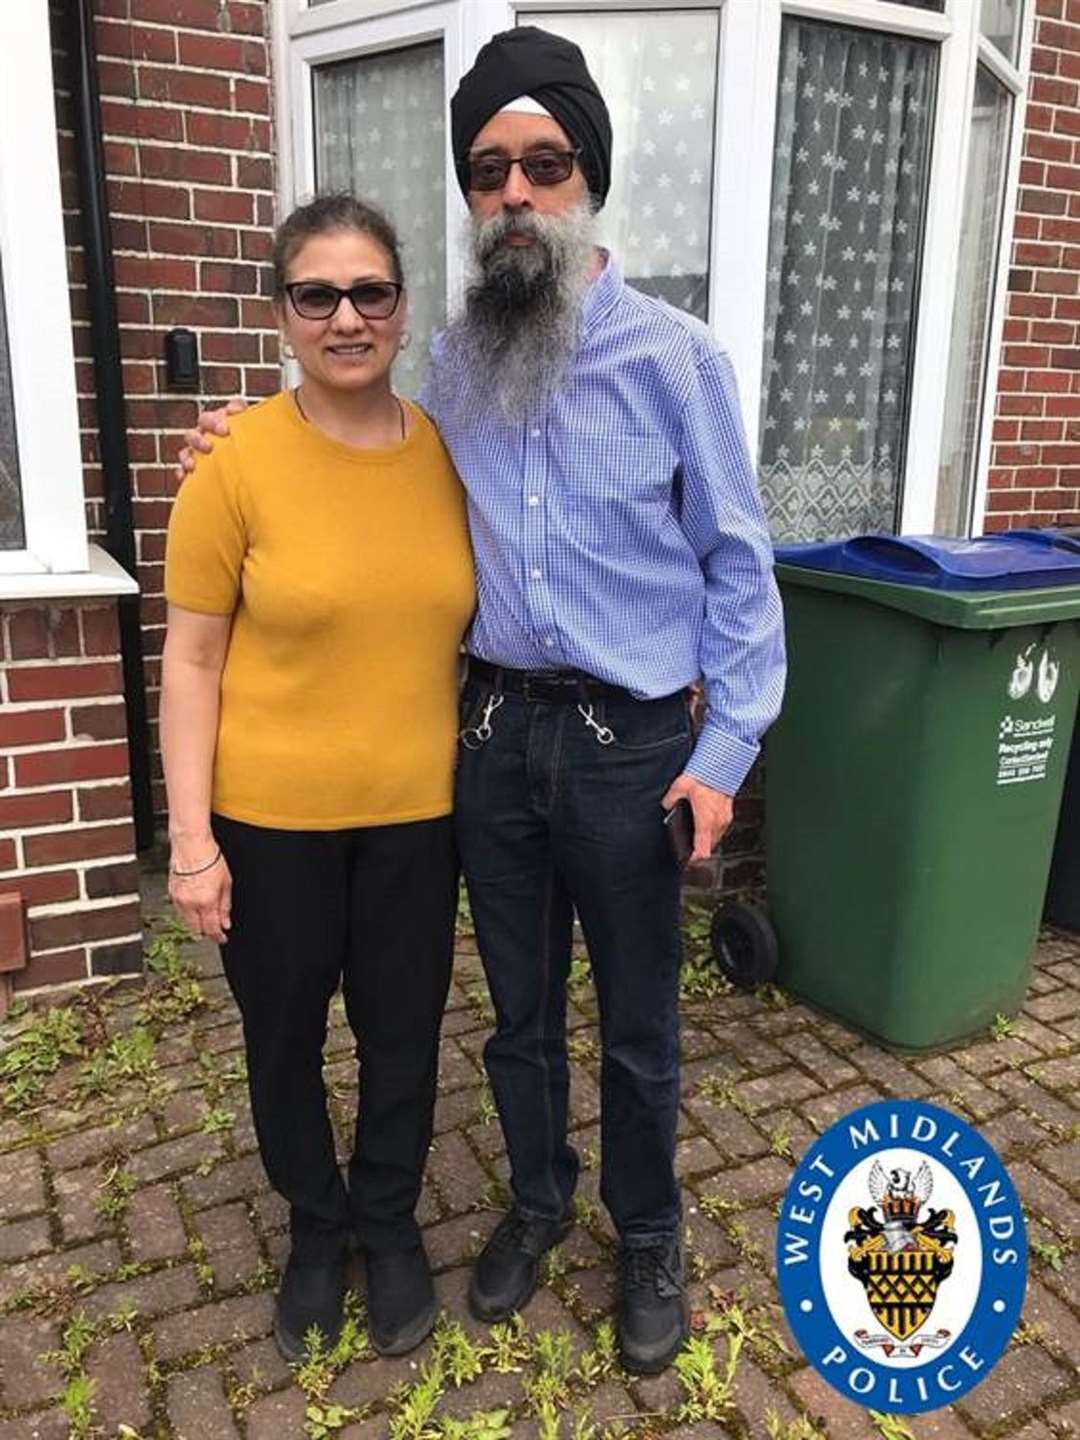 Jasbir Kaur and her husband, Rupinder Singh Bassan, were found with fatal injuries at their semi-detached house in Moat Road, Oldbury (West Midlands Police/PA)